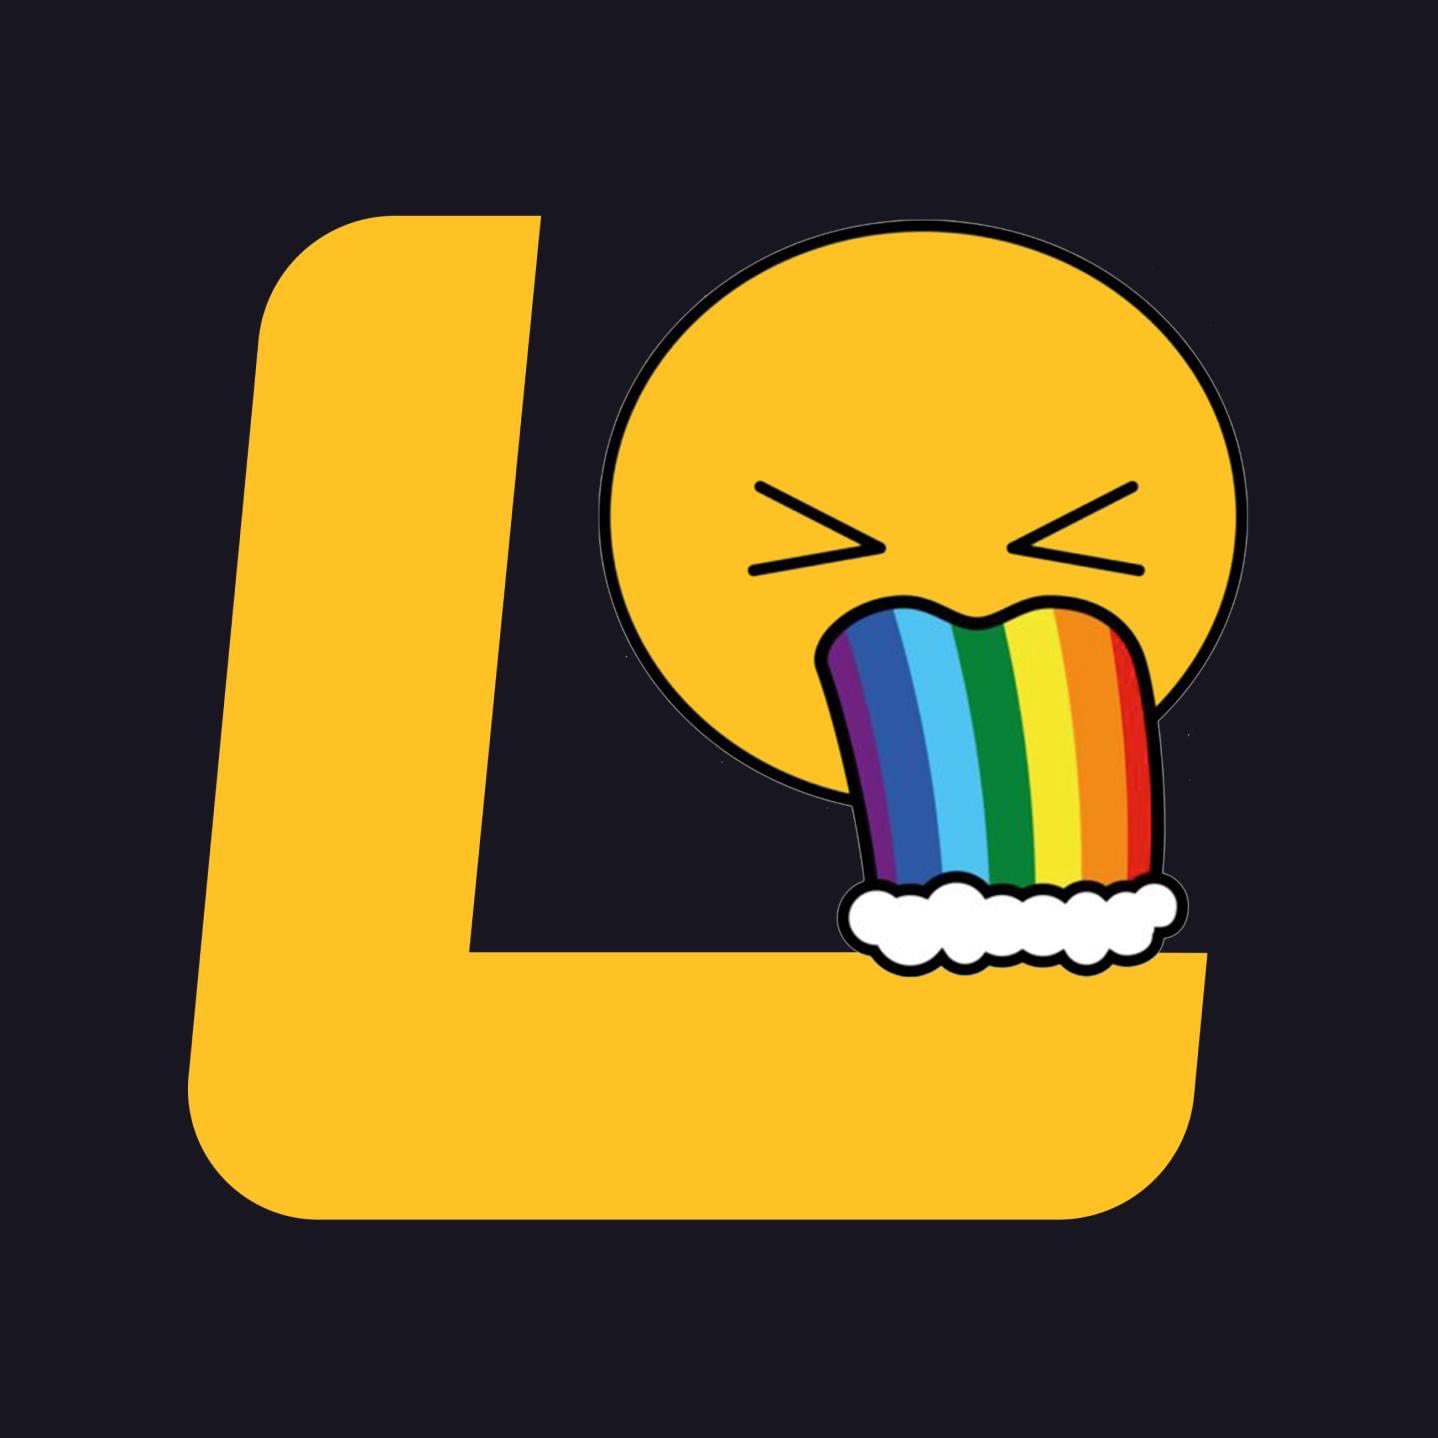 LOOR on X: It's that time of year again where we're forced to change our  logos. 😎 We'll take the heat and stand up to the woke mobs so our  filmmakers can